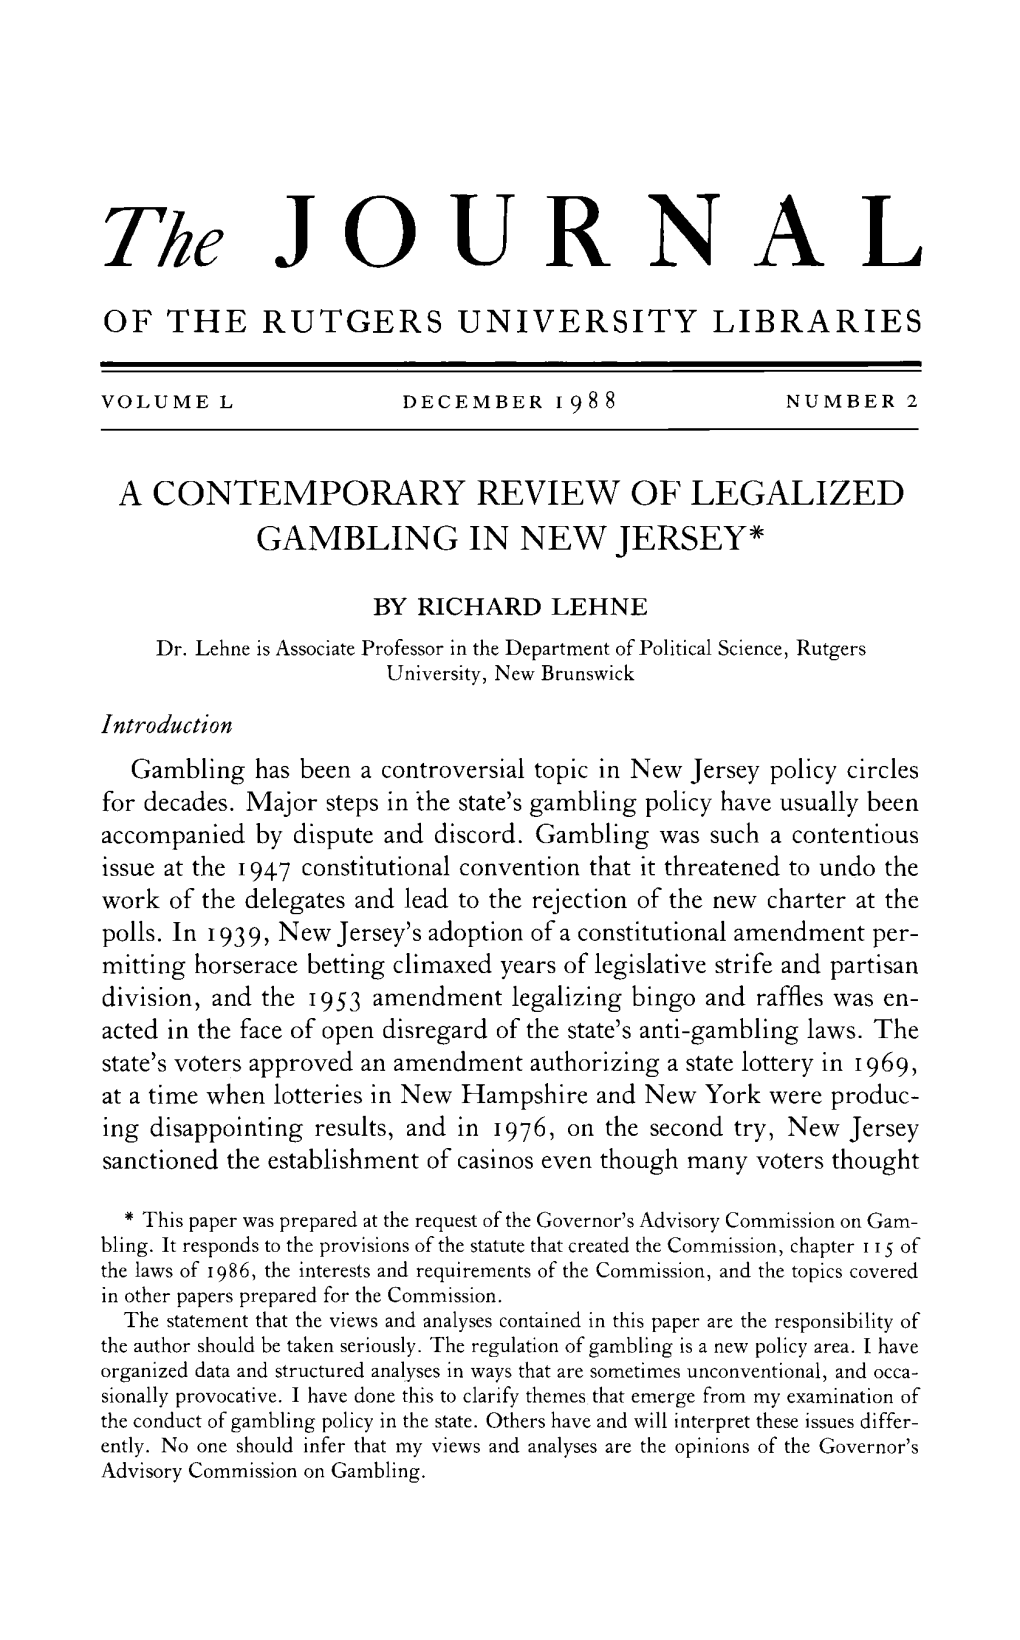 "A Contemporary Review of Legalized Gambling in New Jersey"